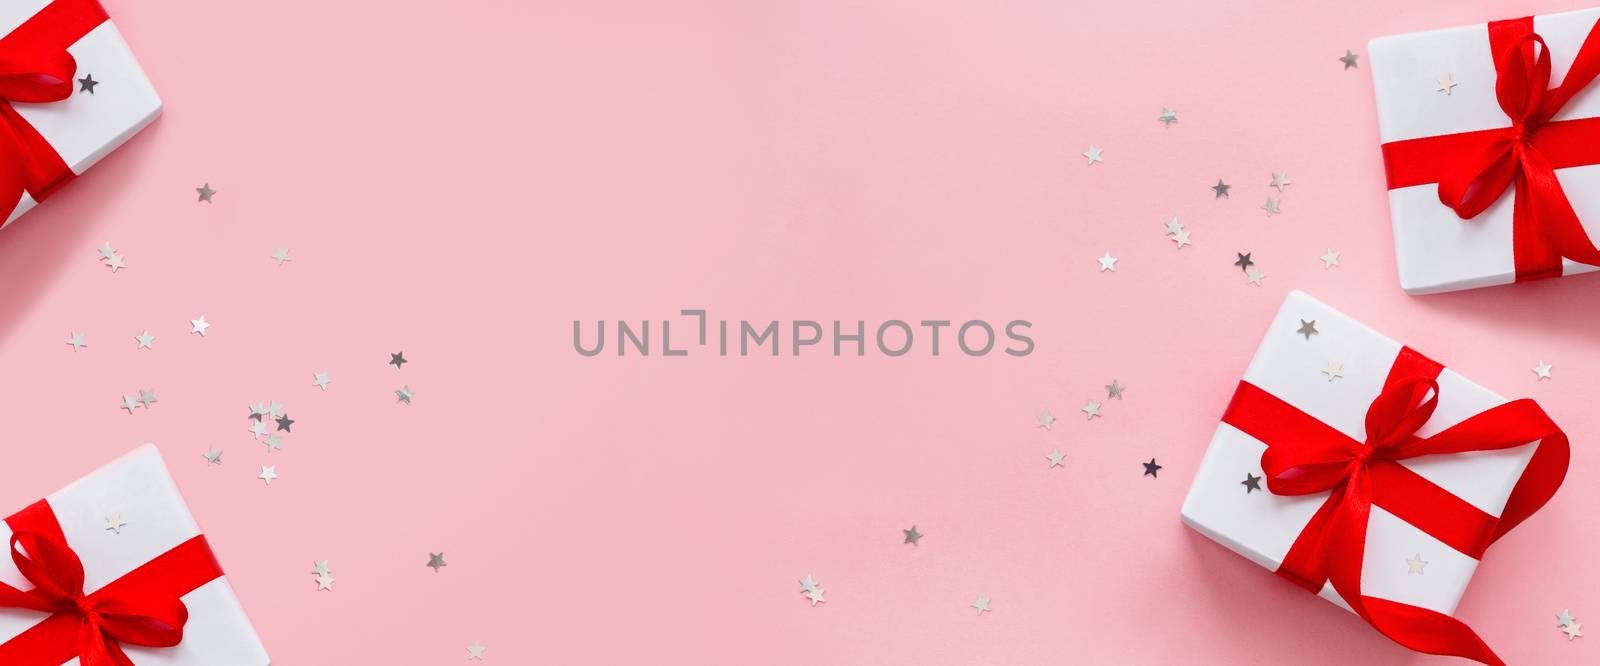 Banner with presents in white wrapping paper on pink backdrop with silver star confetti. Holiday gifts with red ribbon and bow. Top view, flat lay.